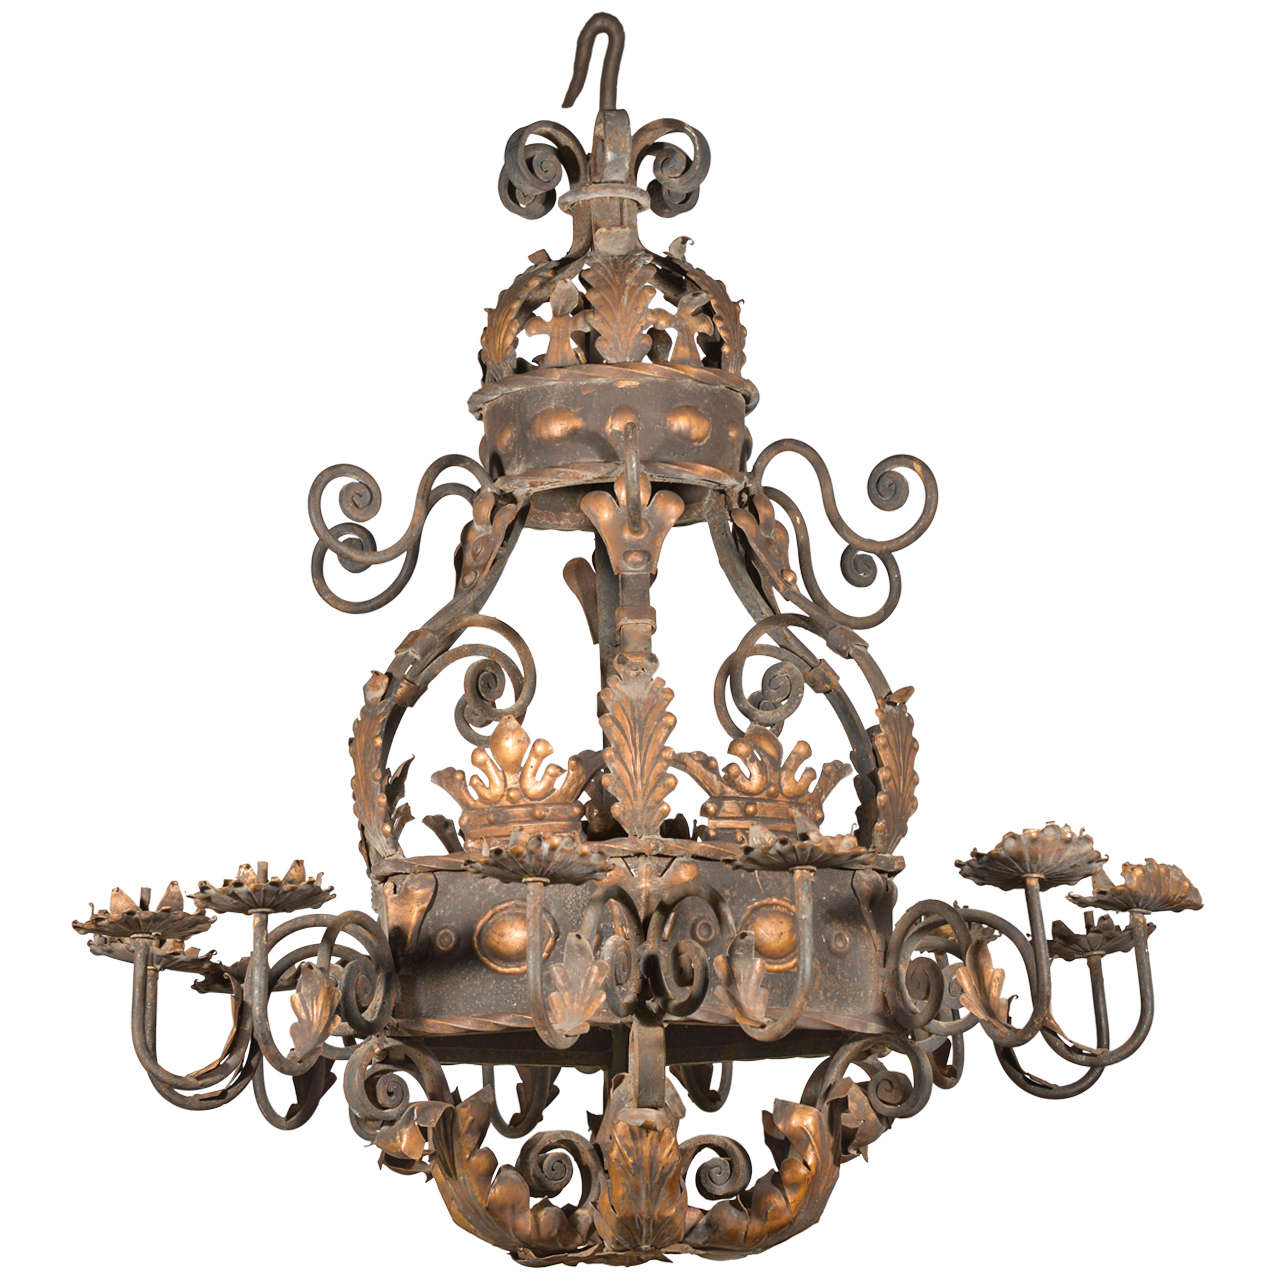 A Large 'Acanthus Leaf' Iron Chandelier from France